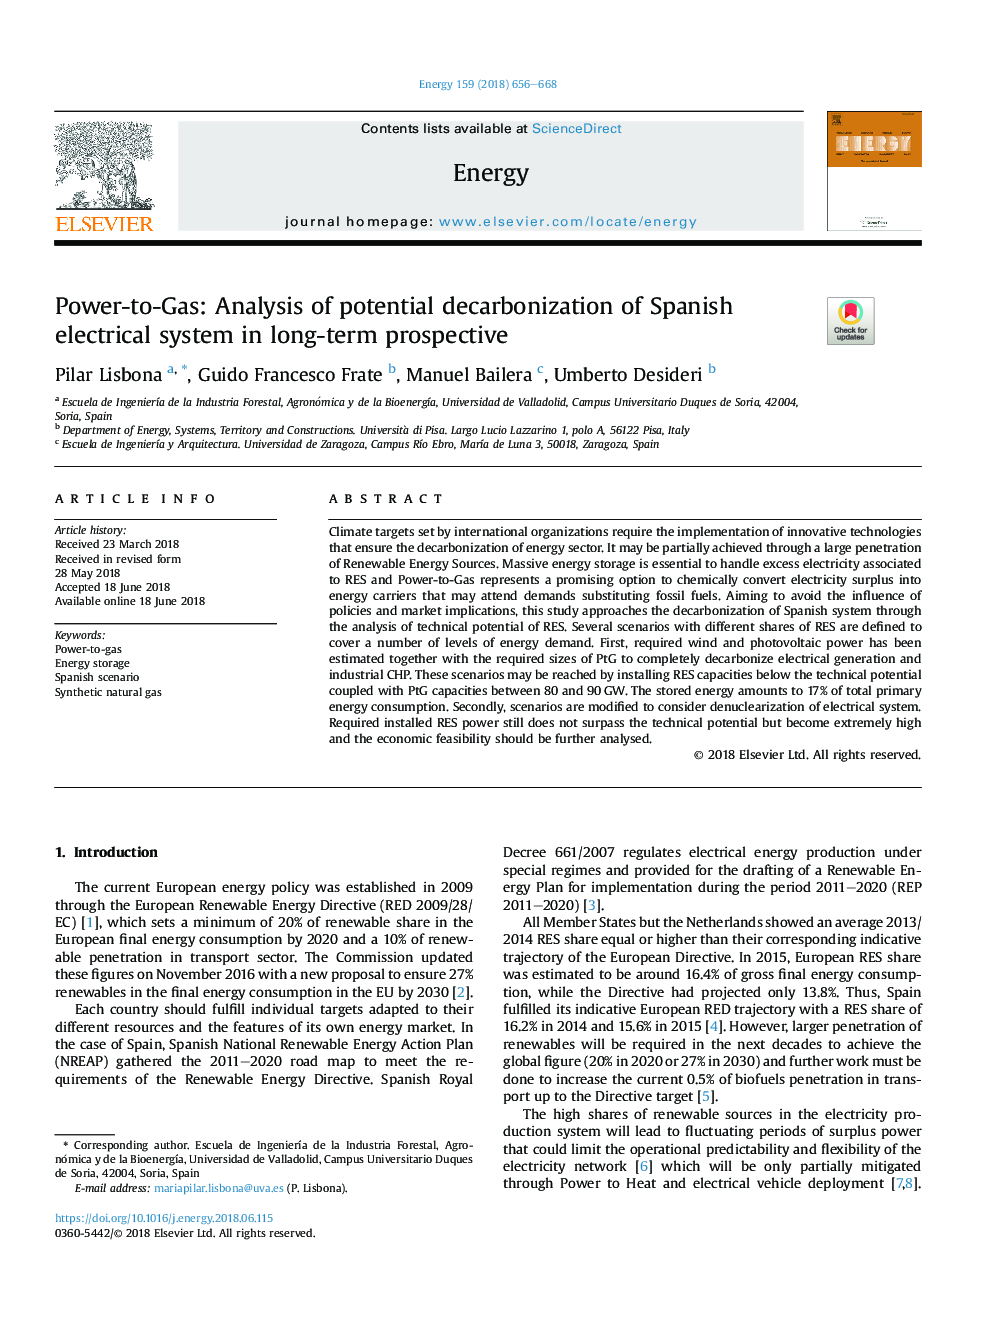 Power-to-Gas: Analysis of potential decarbonization of Spanish electrical system in long-term prospective